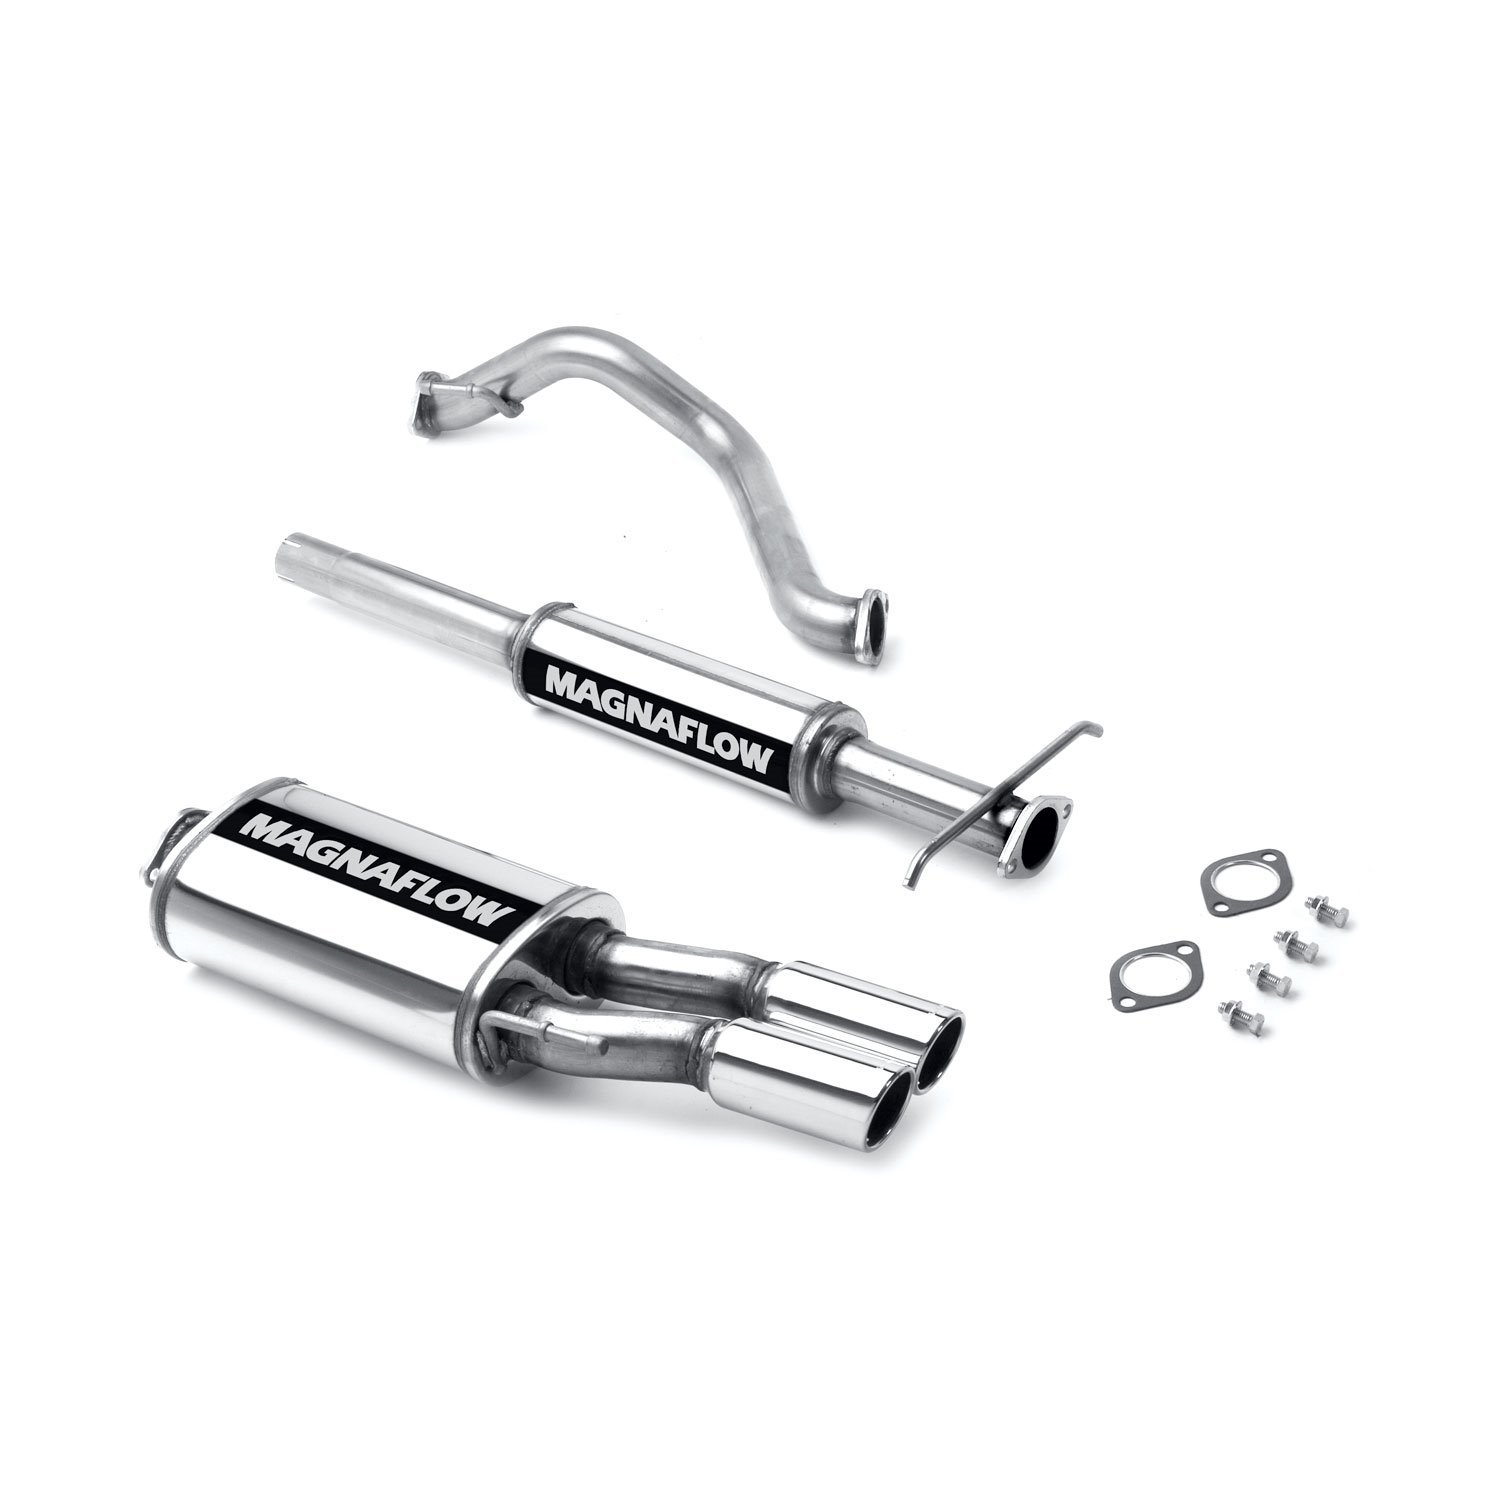 Touring Series Cat-Back Exhaust System 1993-98 VW Golf 2.0L L4